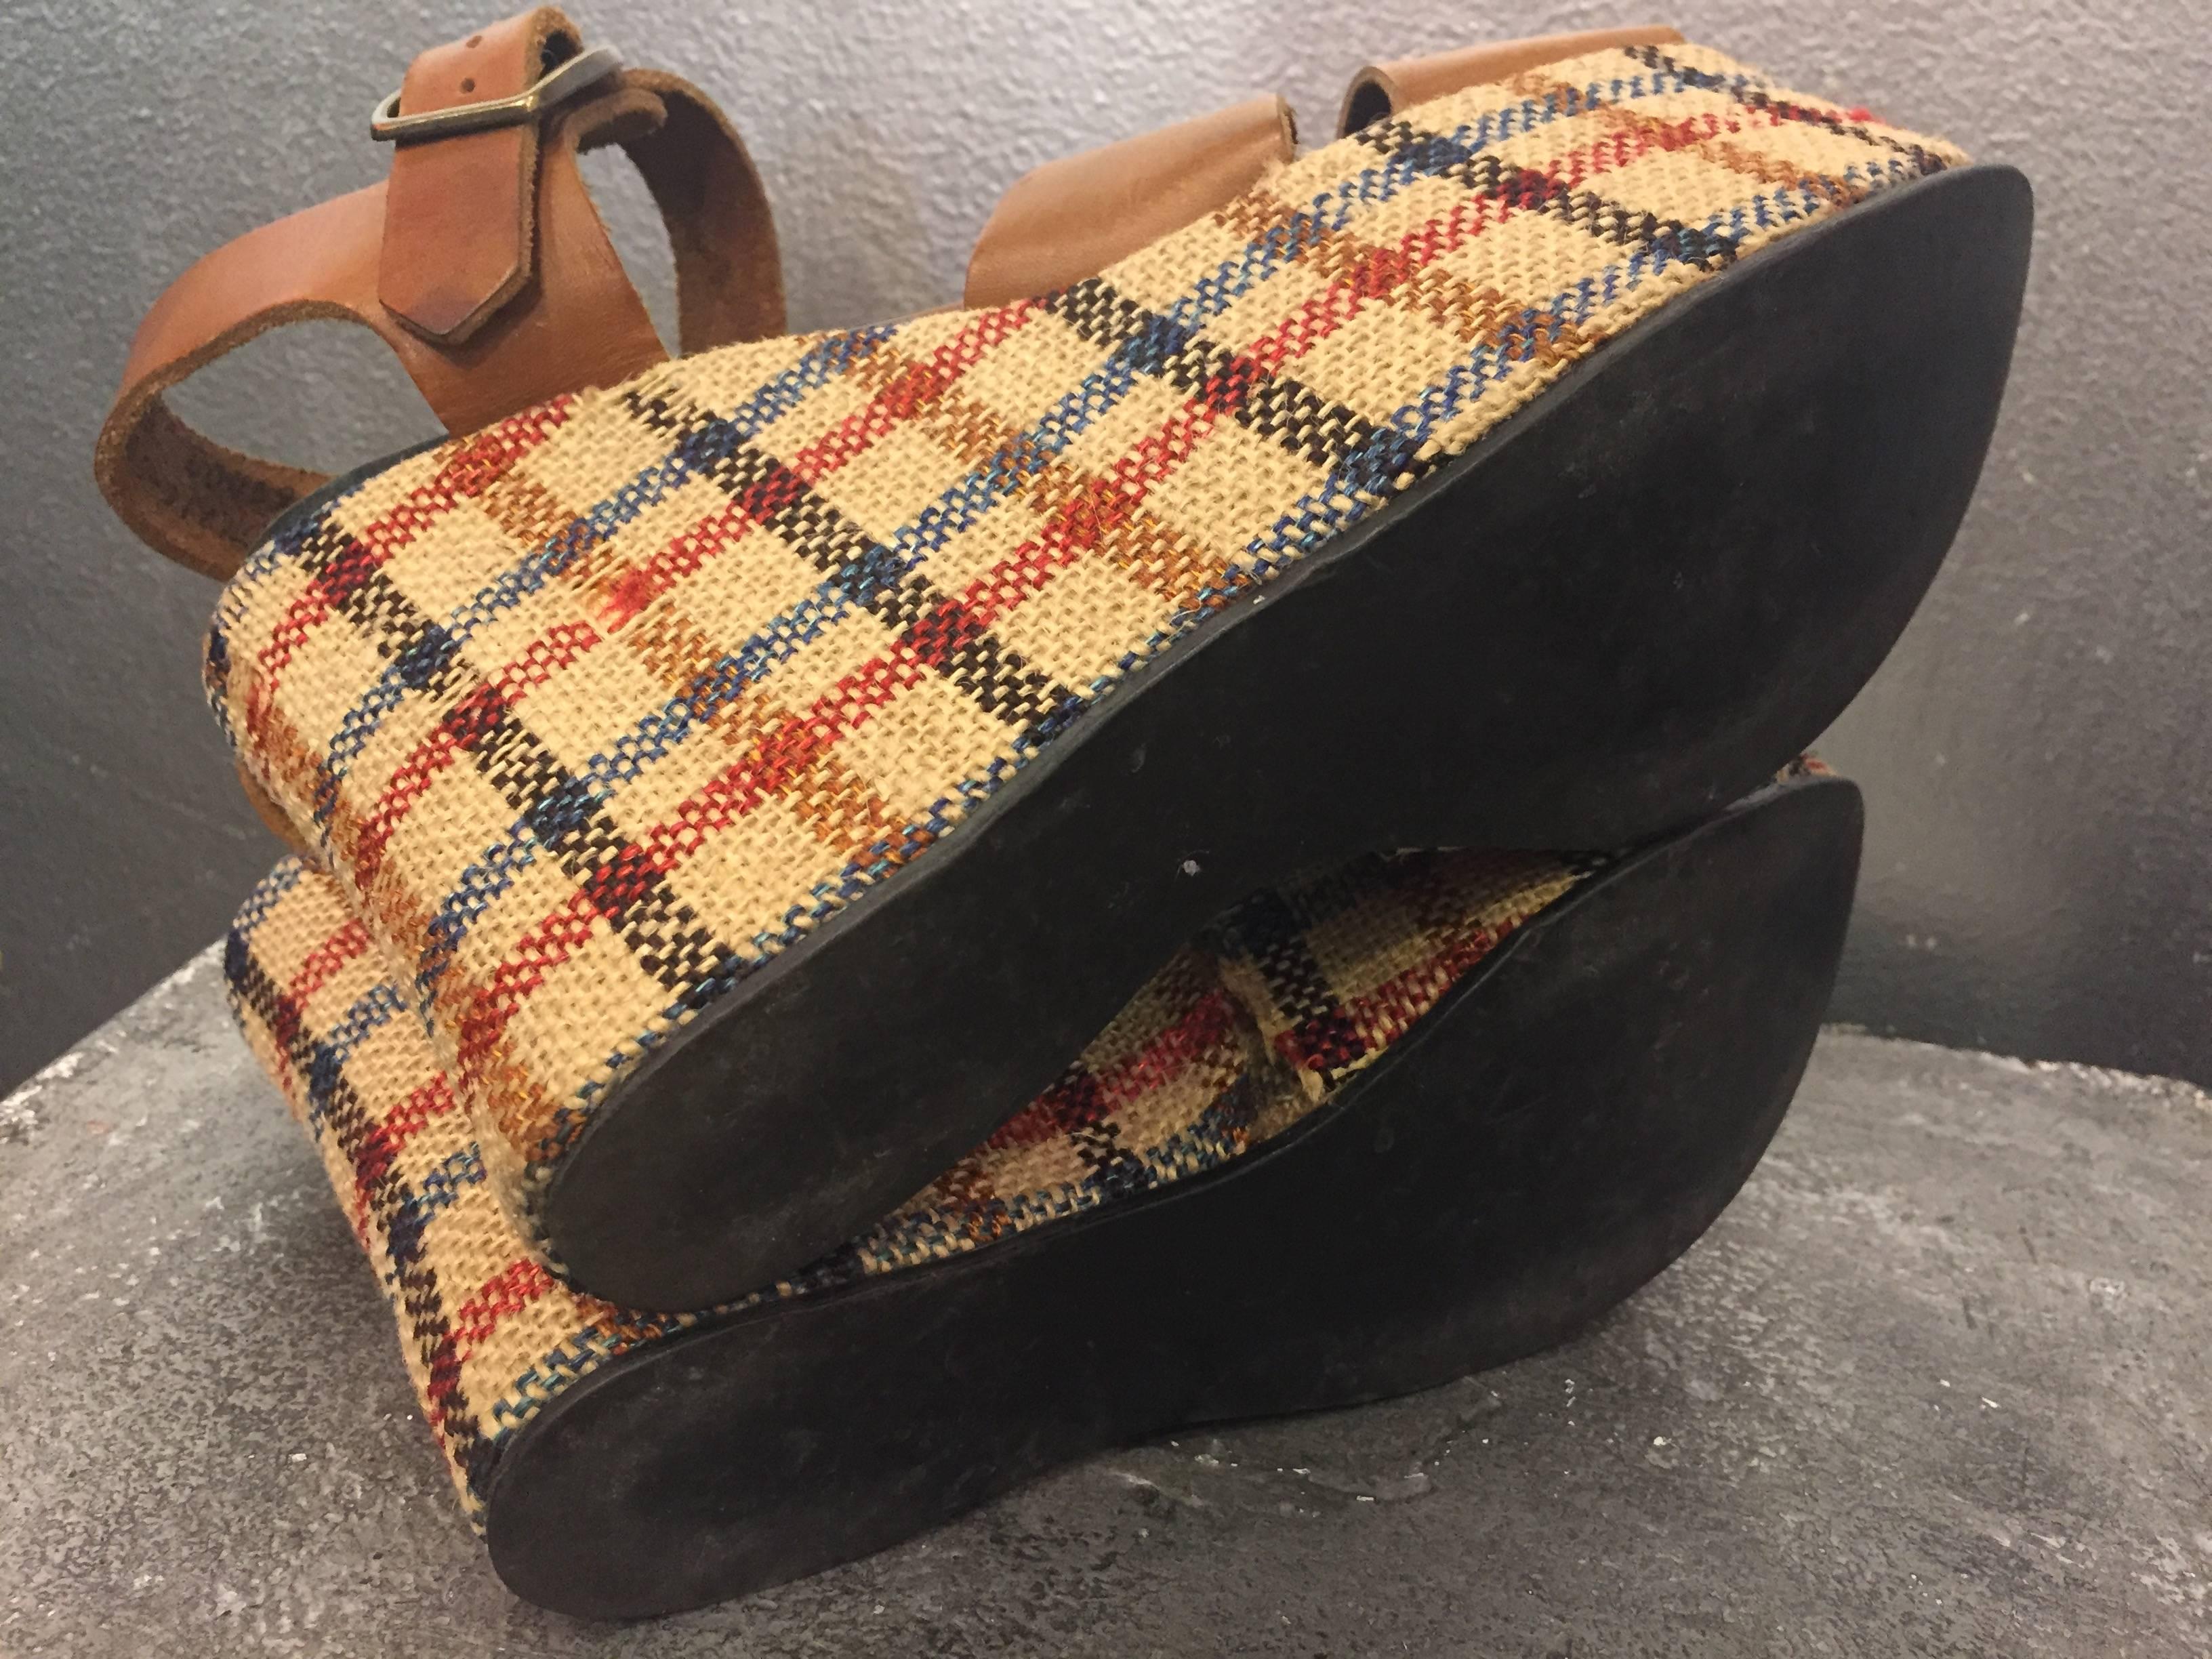 1960's Quality Craft Burlap Plaid Wedge Platforms In Good Condition For Sale In Gresham, OR